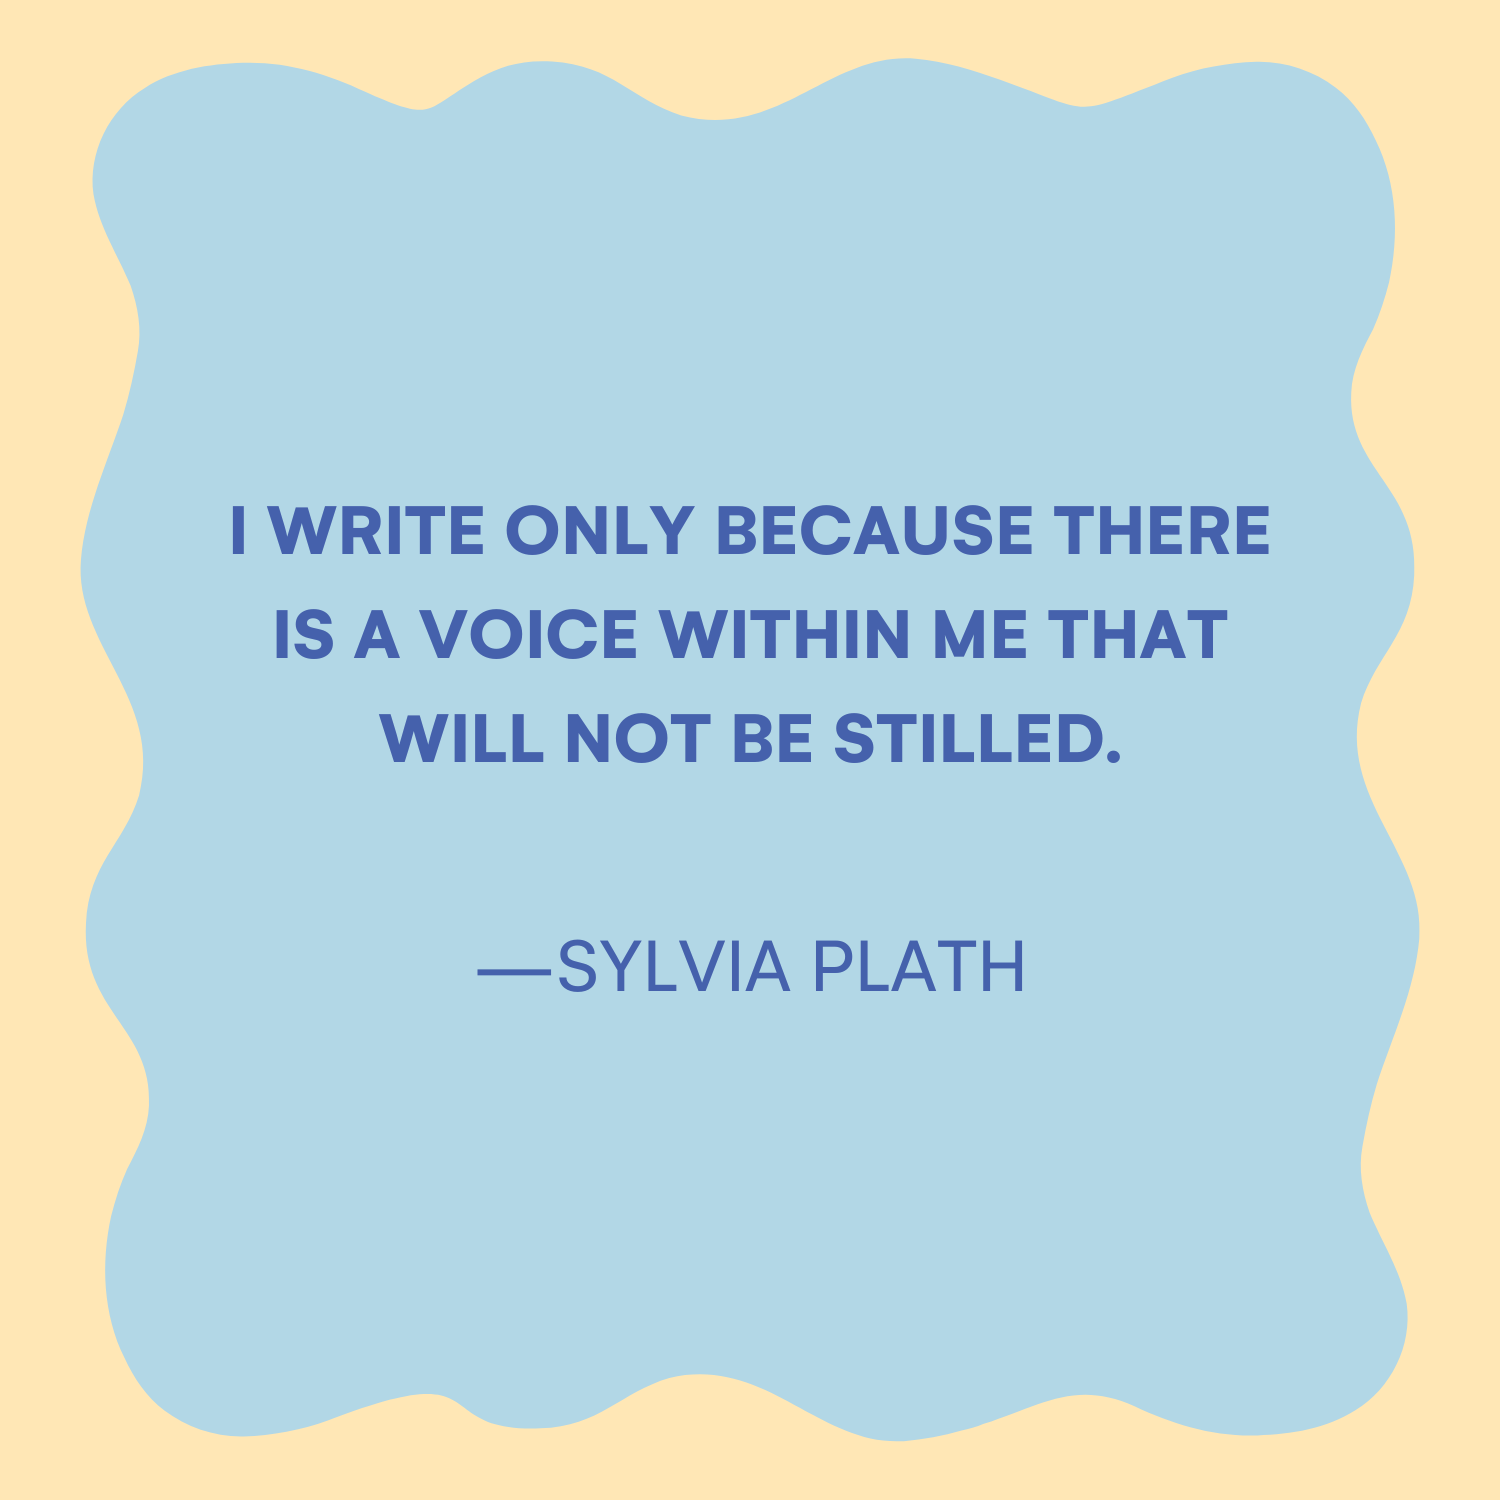 <p>"I write only because there is a voice within me that will not be stilled." —Sylvia Plath</p>